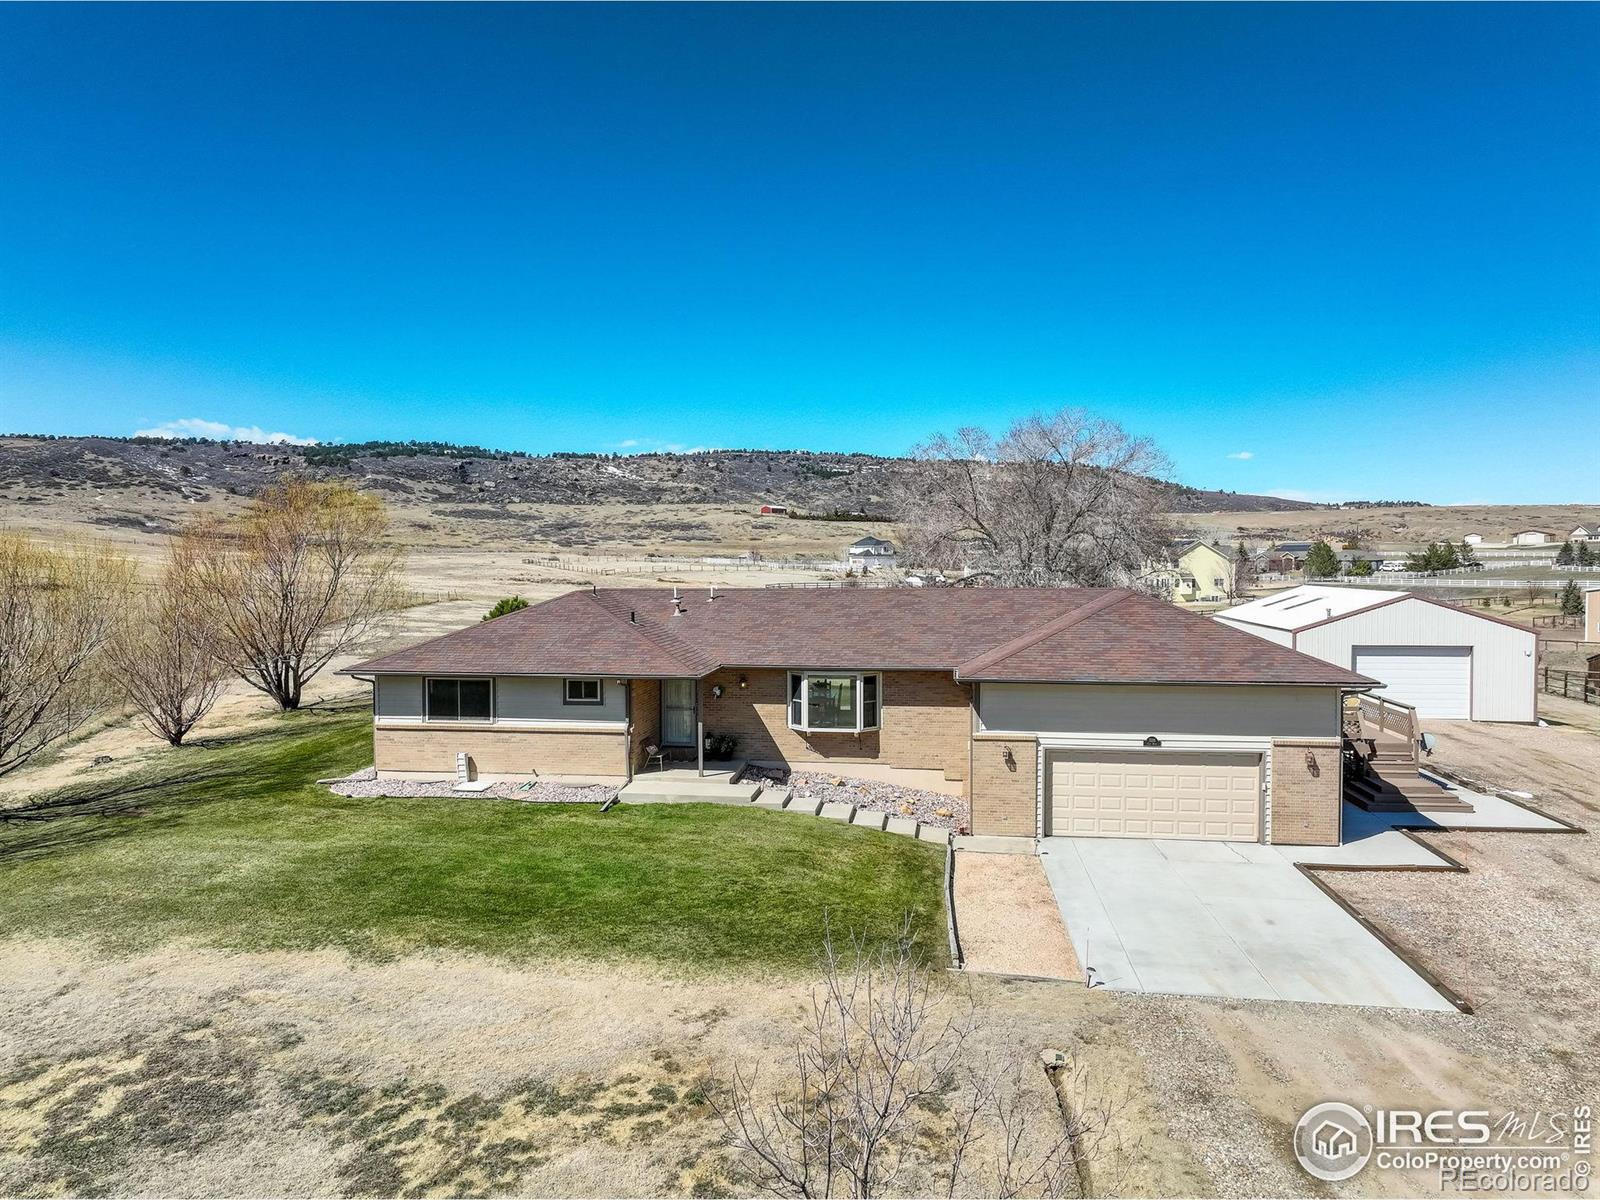 5316  glen drive, Berthoud sold home. Closed on 2024-04-29 for $1,000,000.